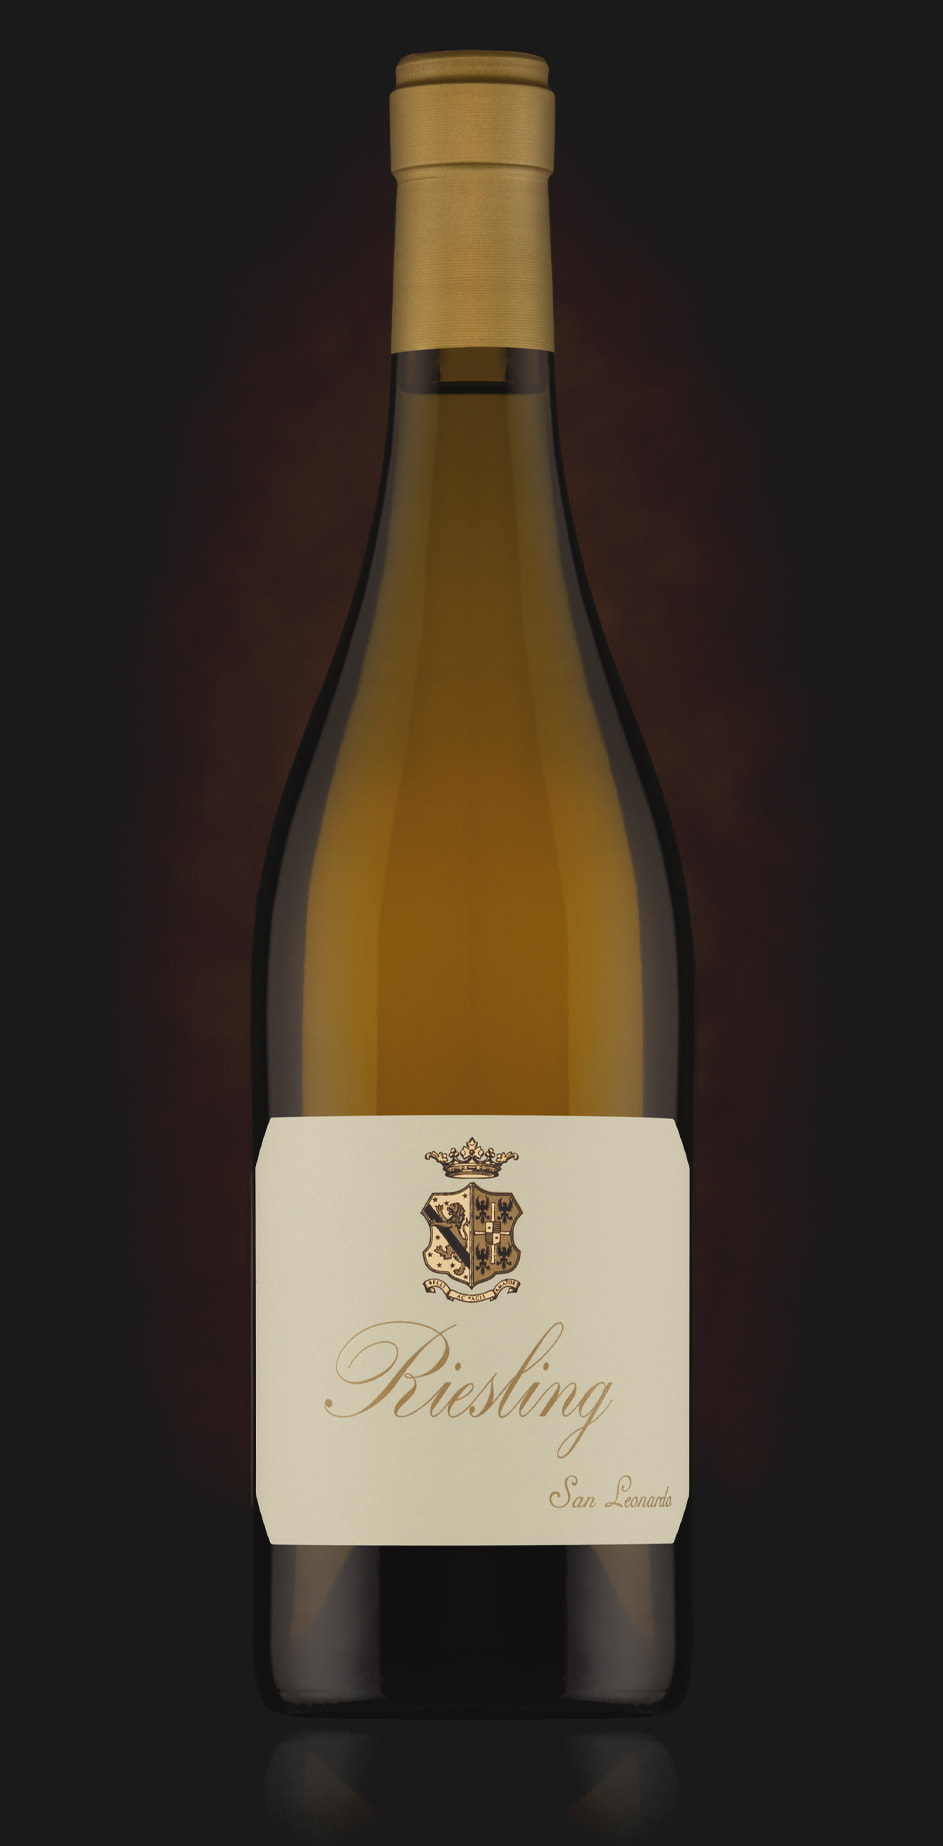 Acquista online Riesling